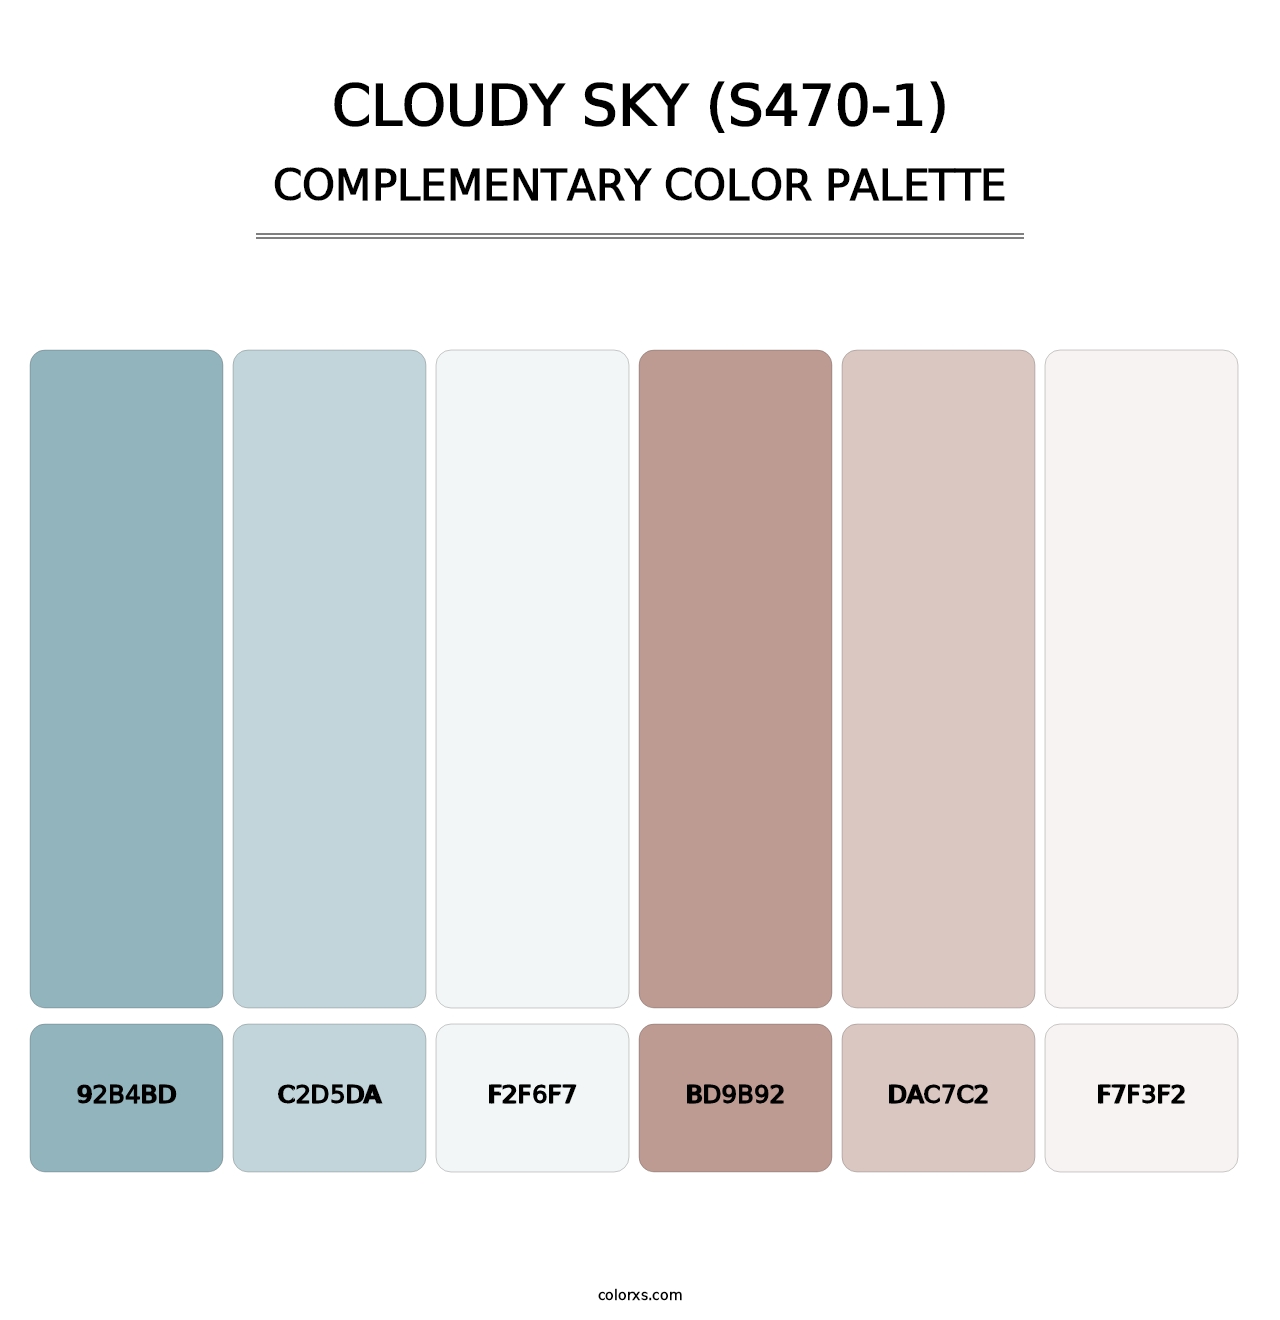 Cloudy Sky (S470-1) - Complementary Color Palette